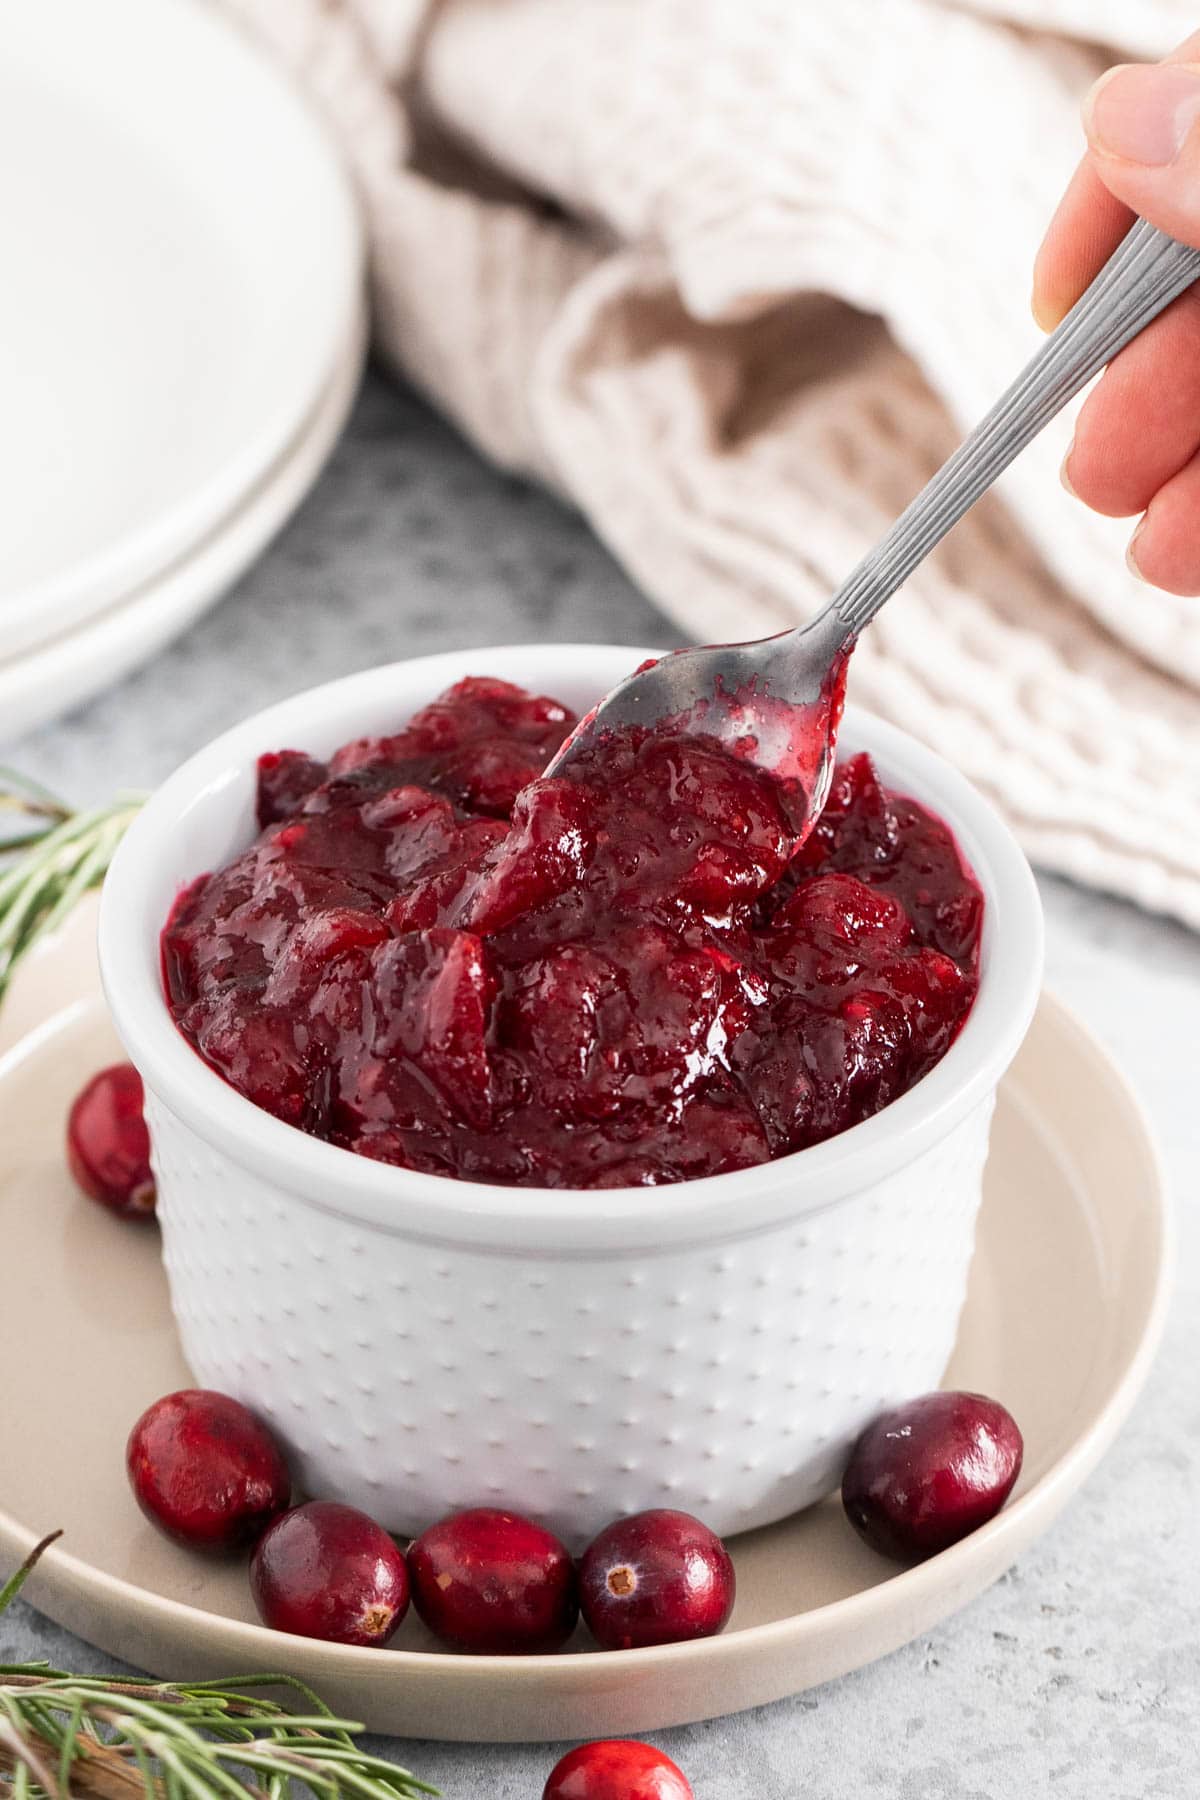 A woman's hand holding a spoon scooping out some cranberry sauce of a white bowl.